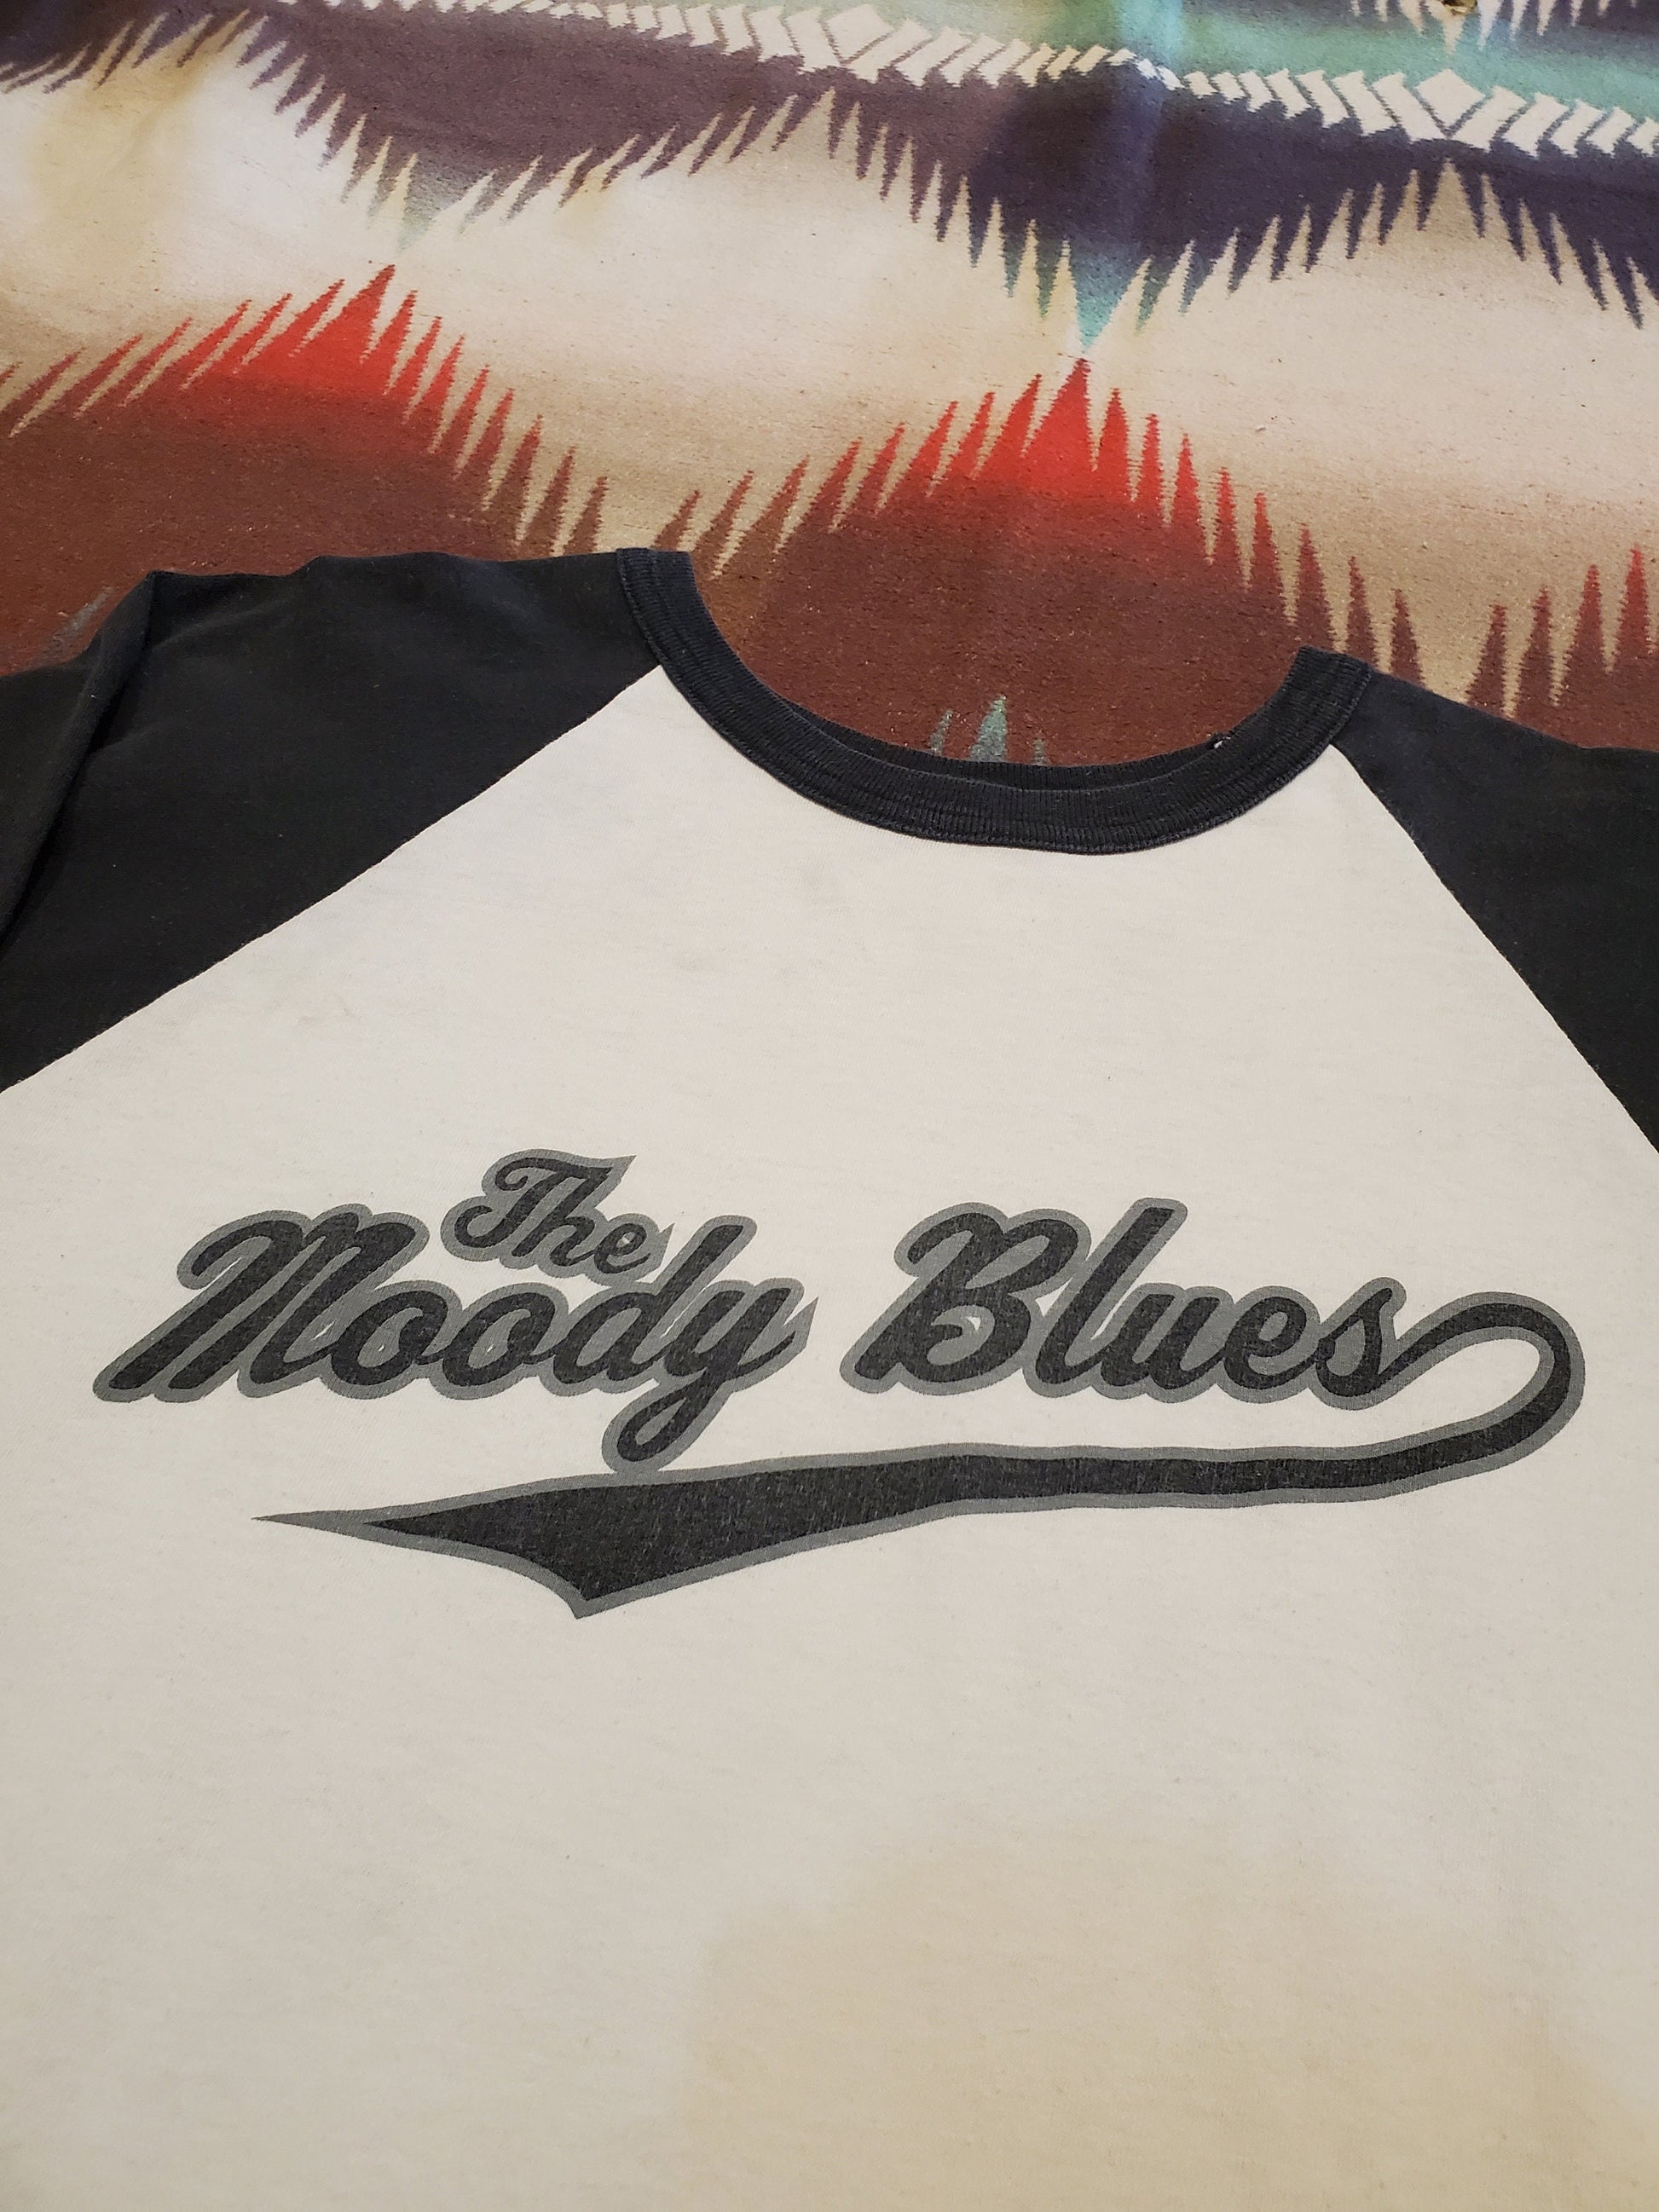 1990s 1999 The Moody Blues Tour Giant Raglan T-Shirt Made in USA Size L